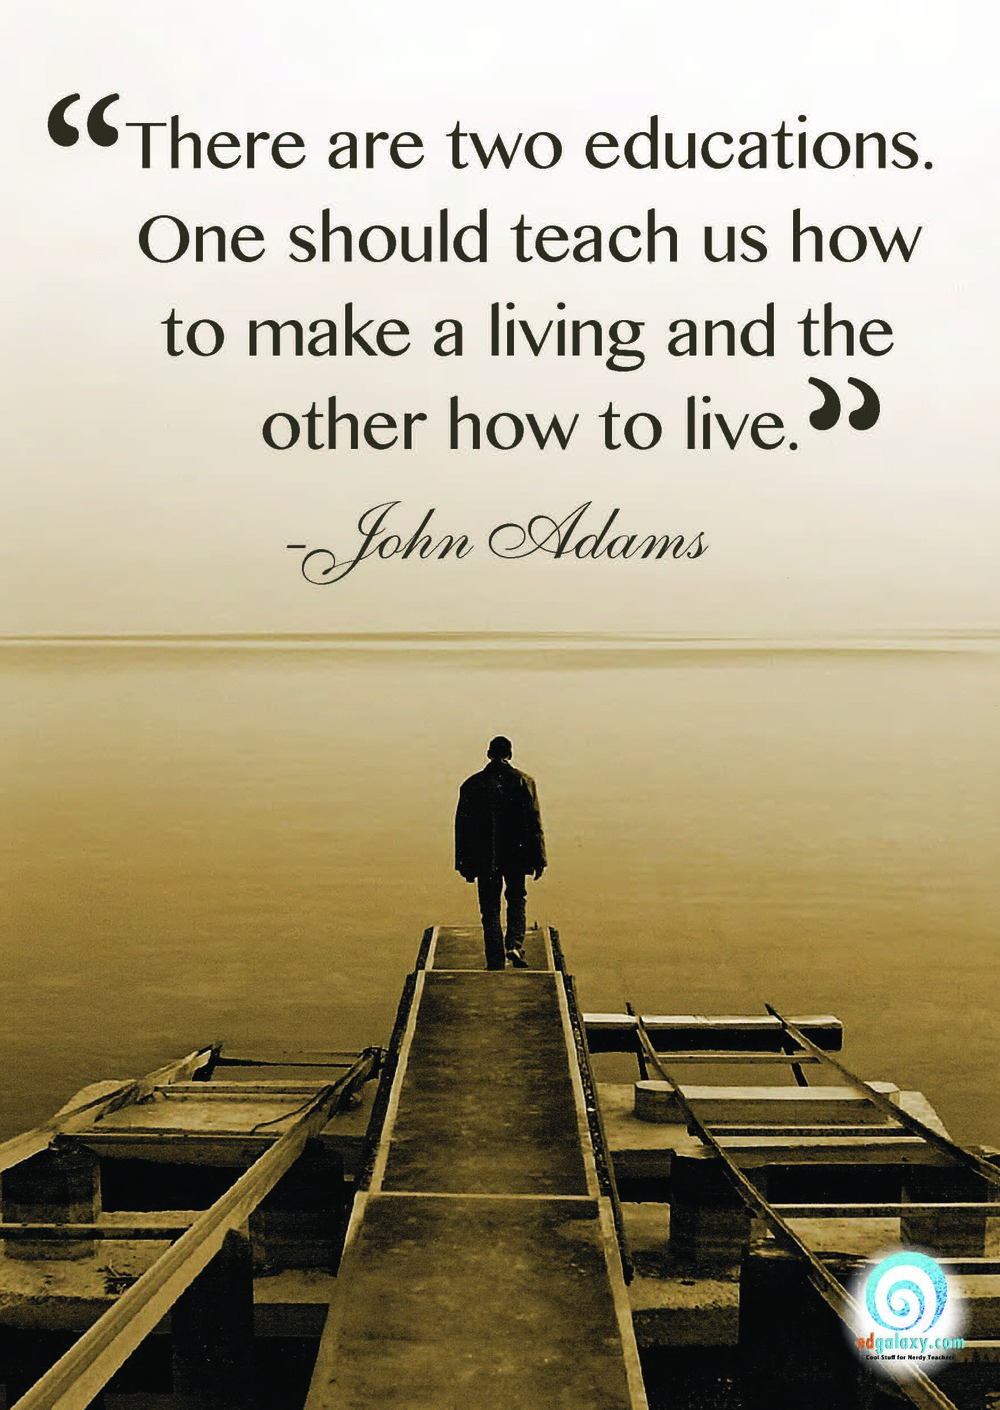 Education And Life Quotes 15